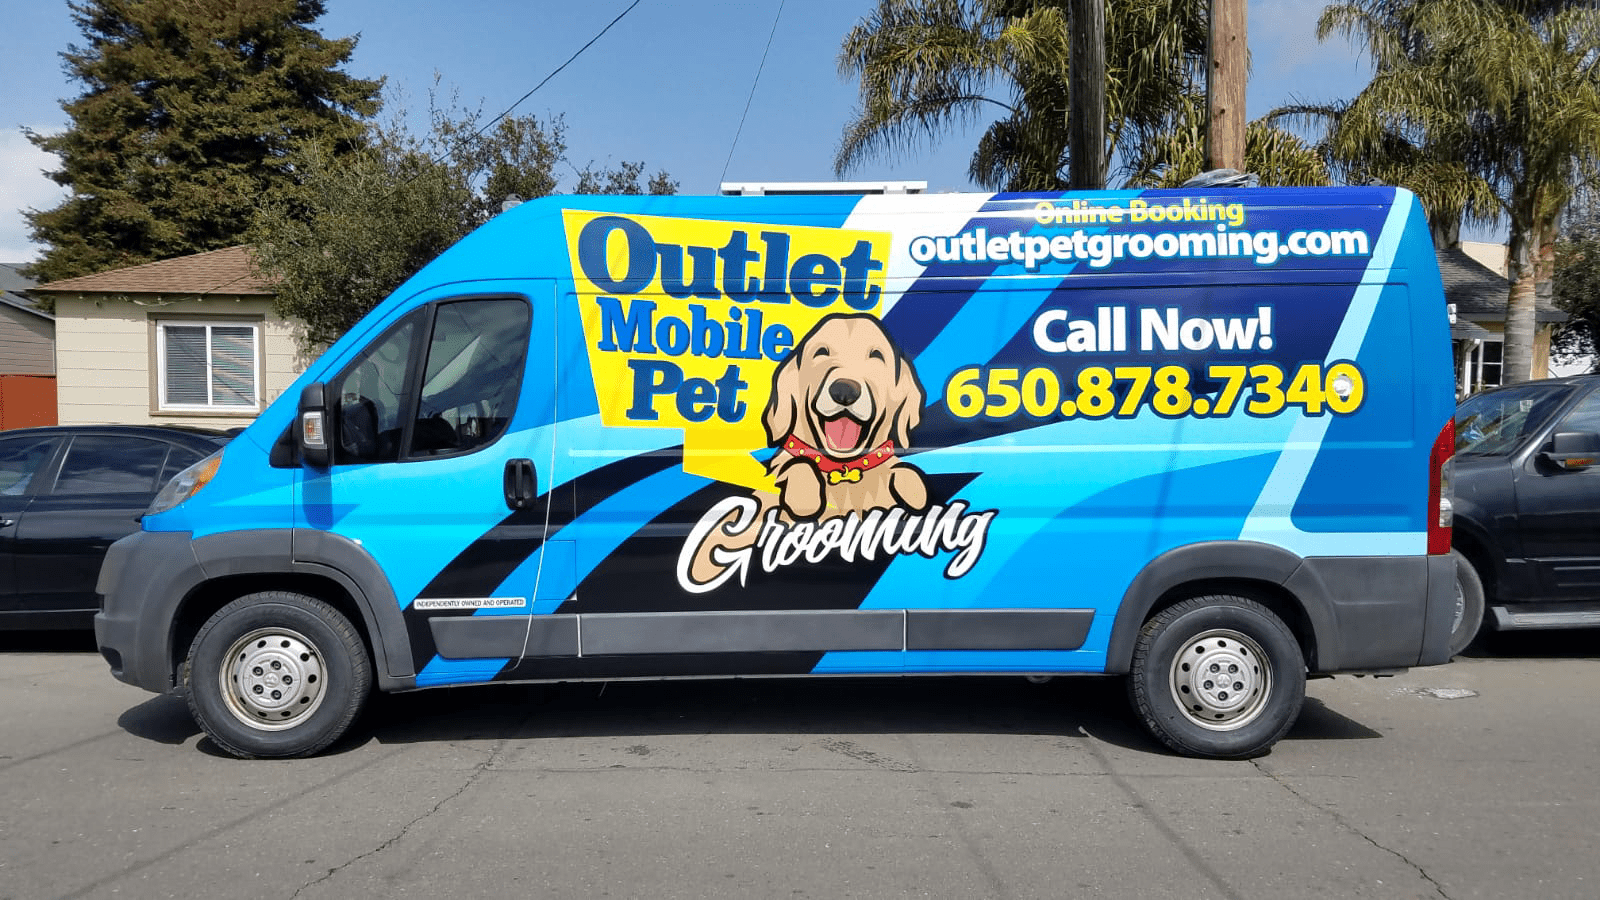 Outlet Mobile Pet Grooming - Burlingame, CA, US, grooming prices